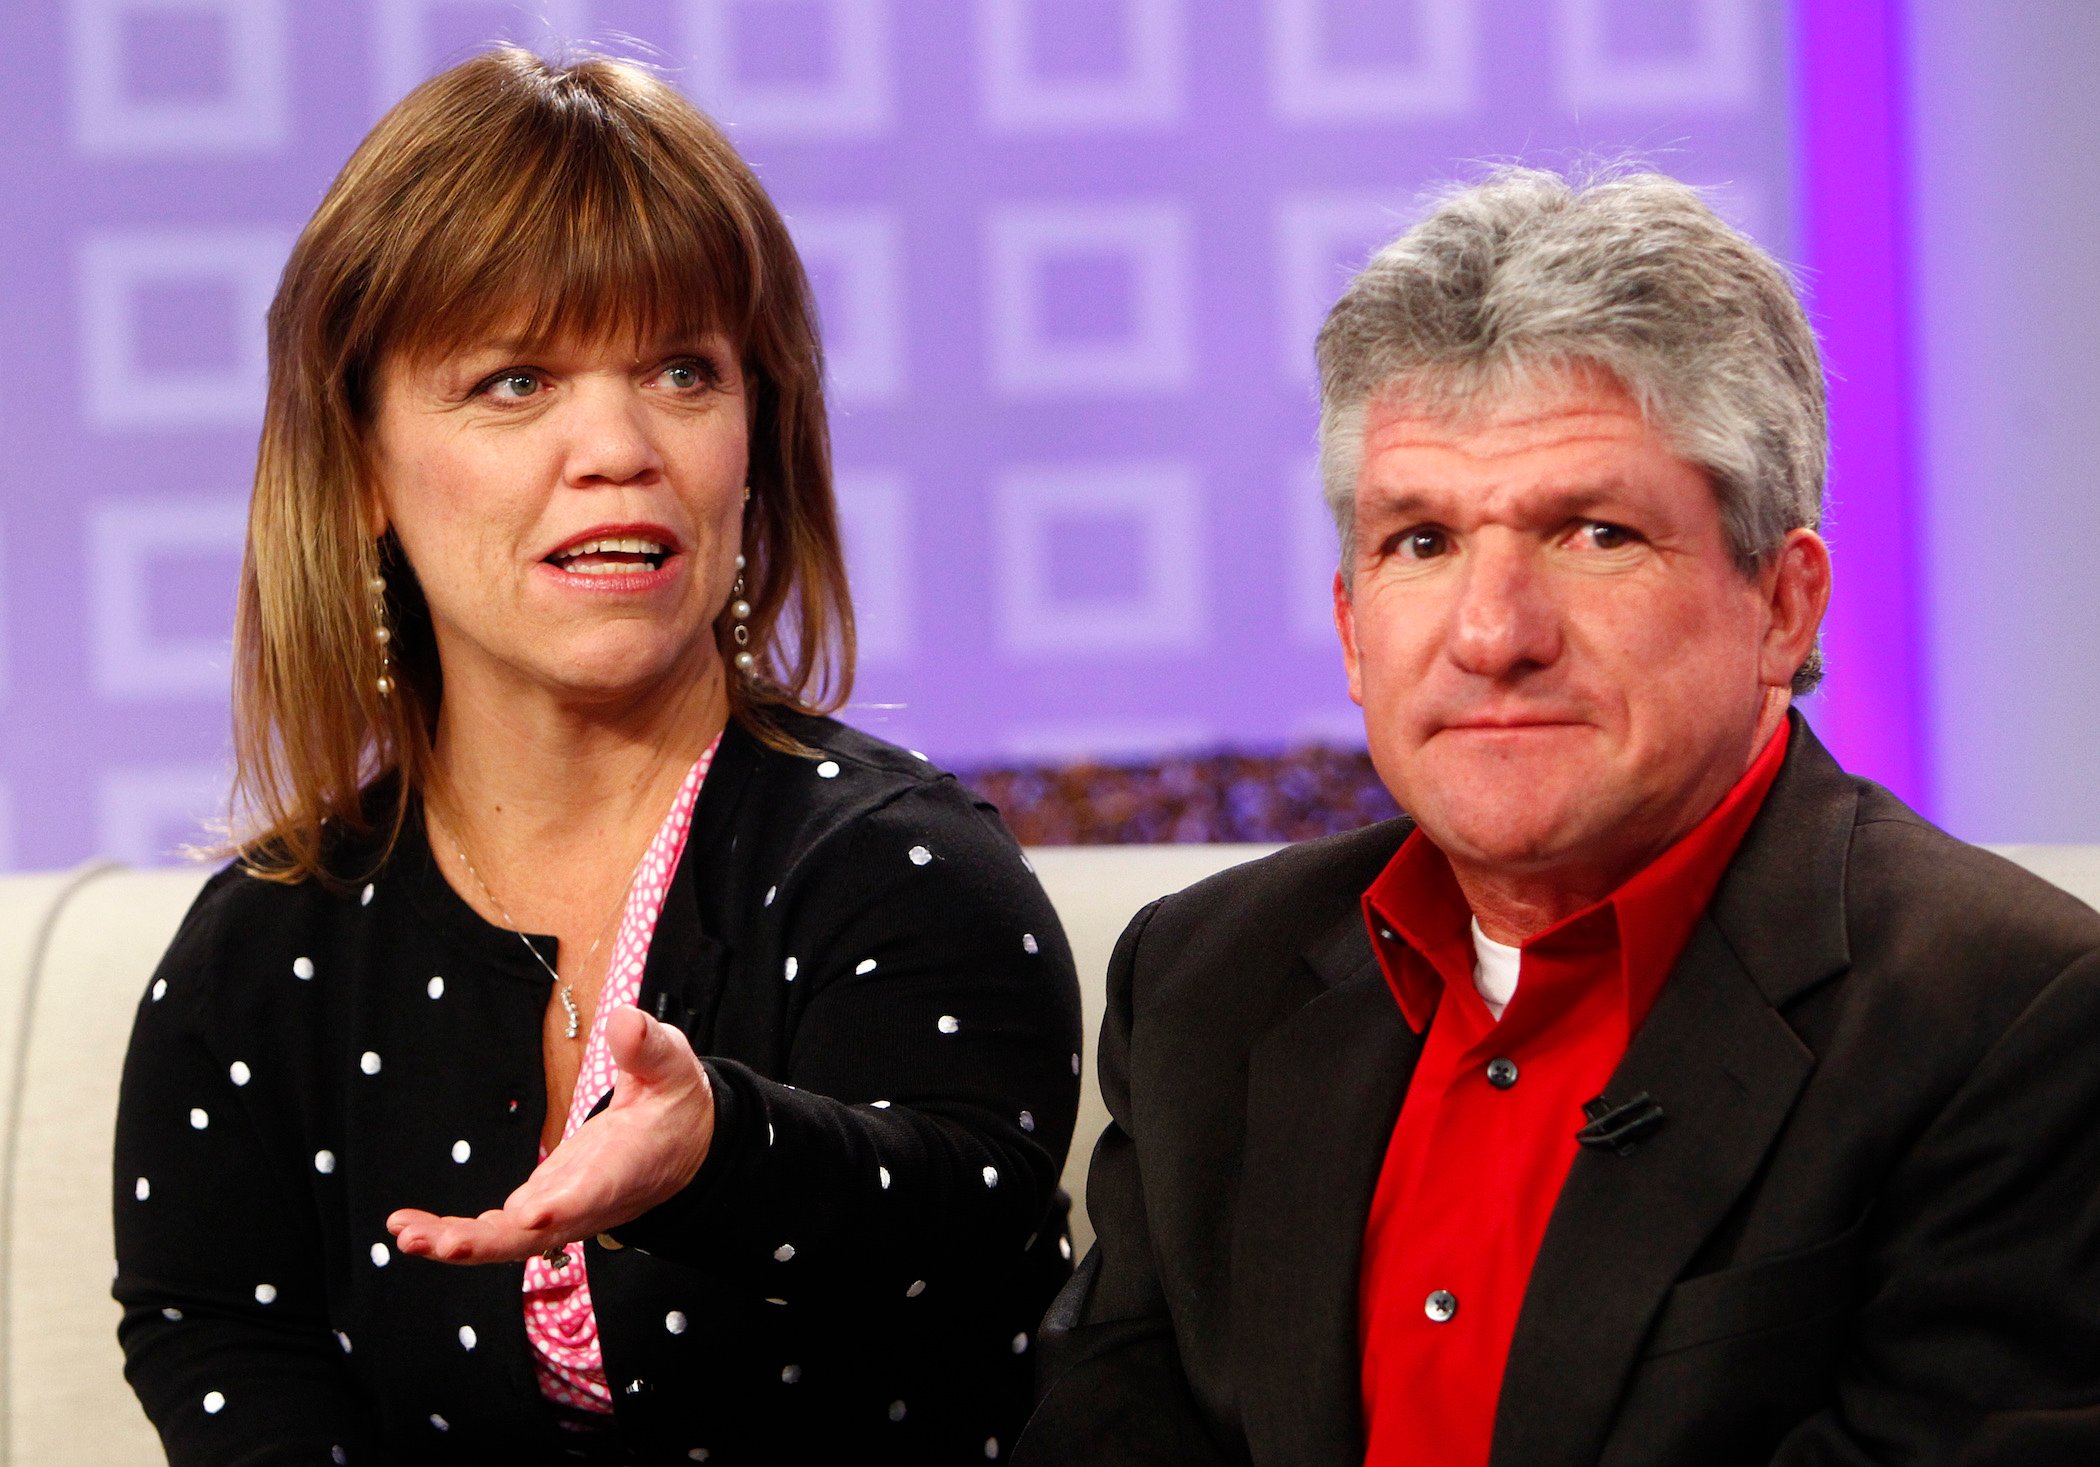 Amy Roloff and Matt Roloff of the Roloff family from 'Little People, Big World' appear on NBC News' 'Today' show